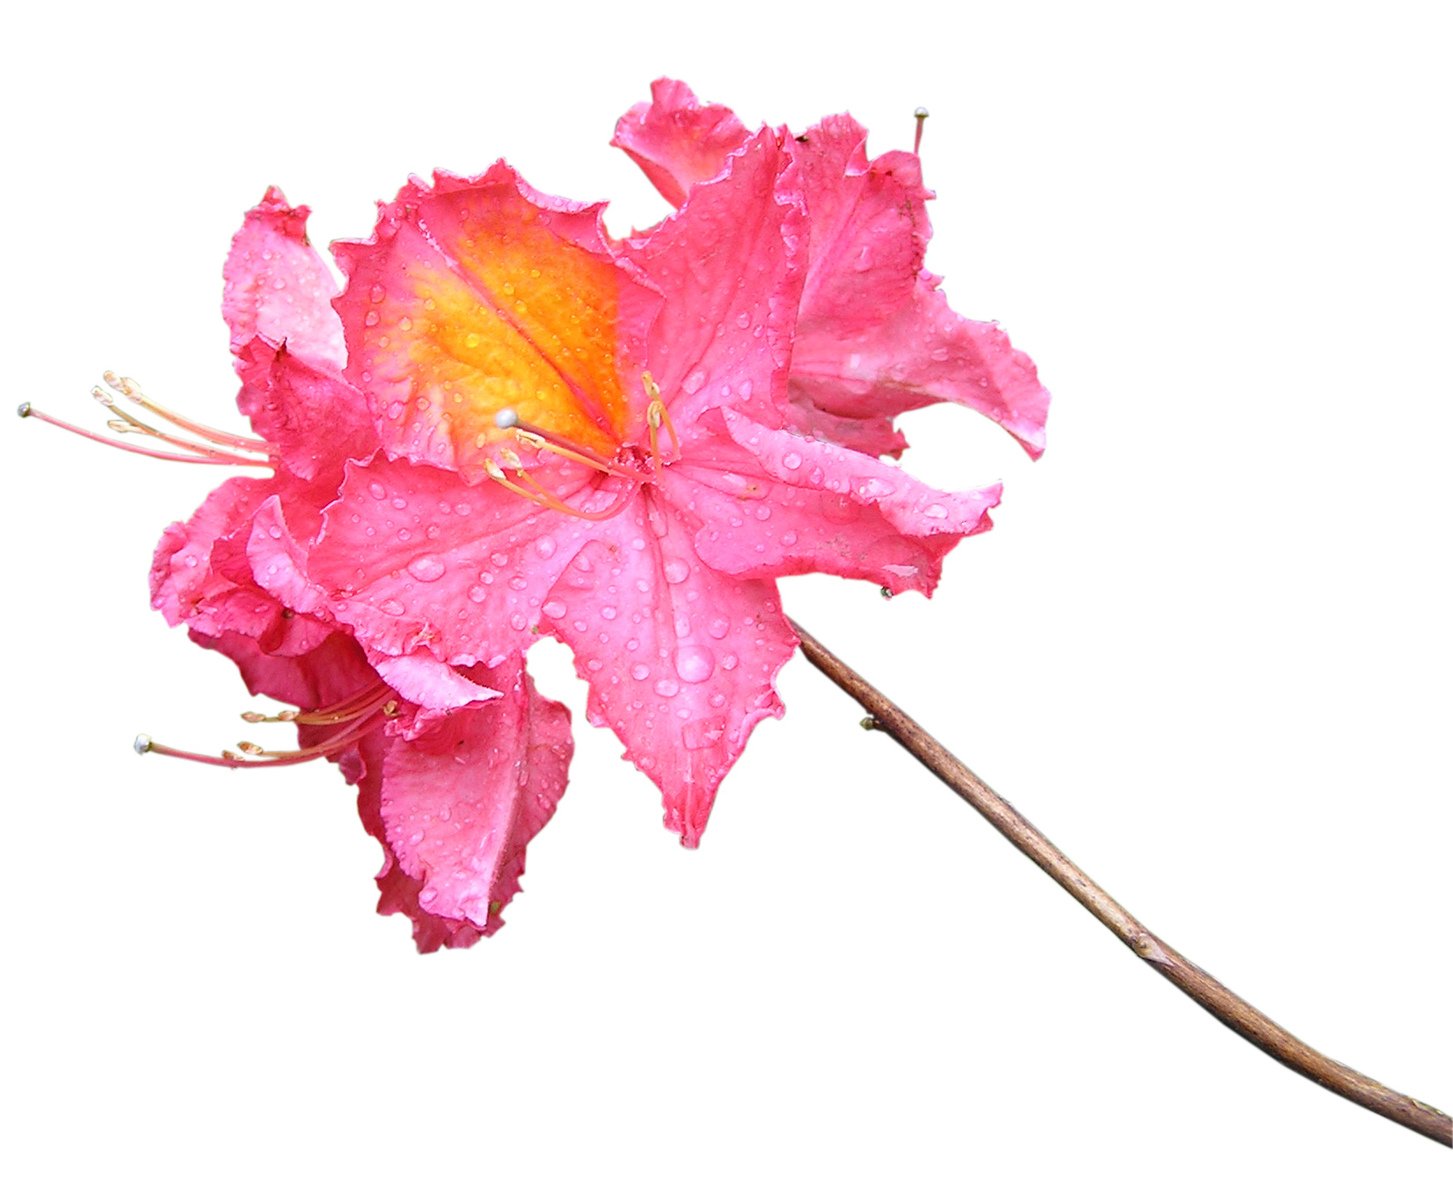 pink flower with yellow center and raindrops on its petals